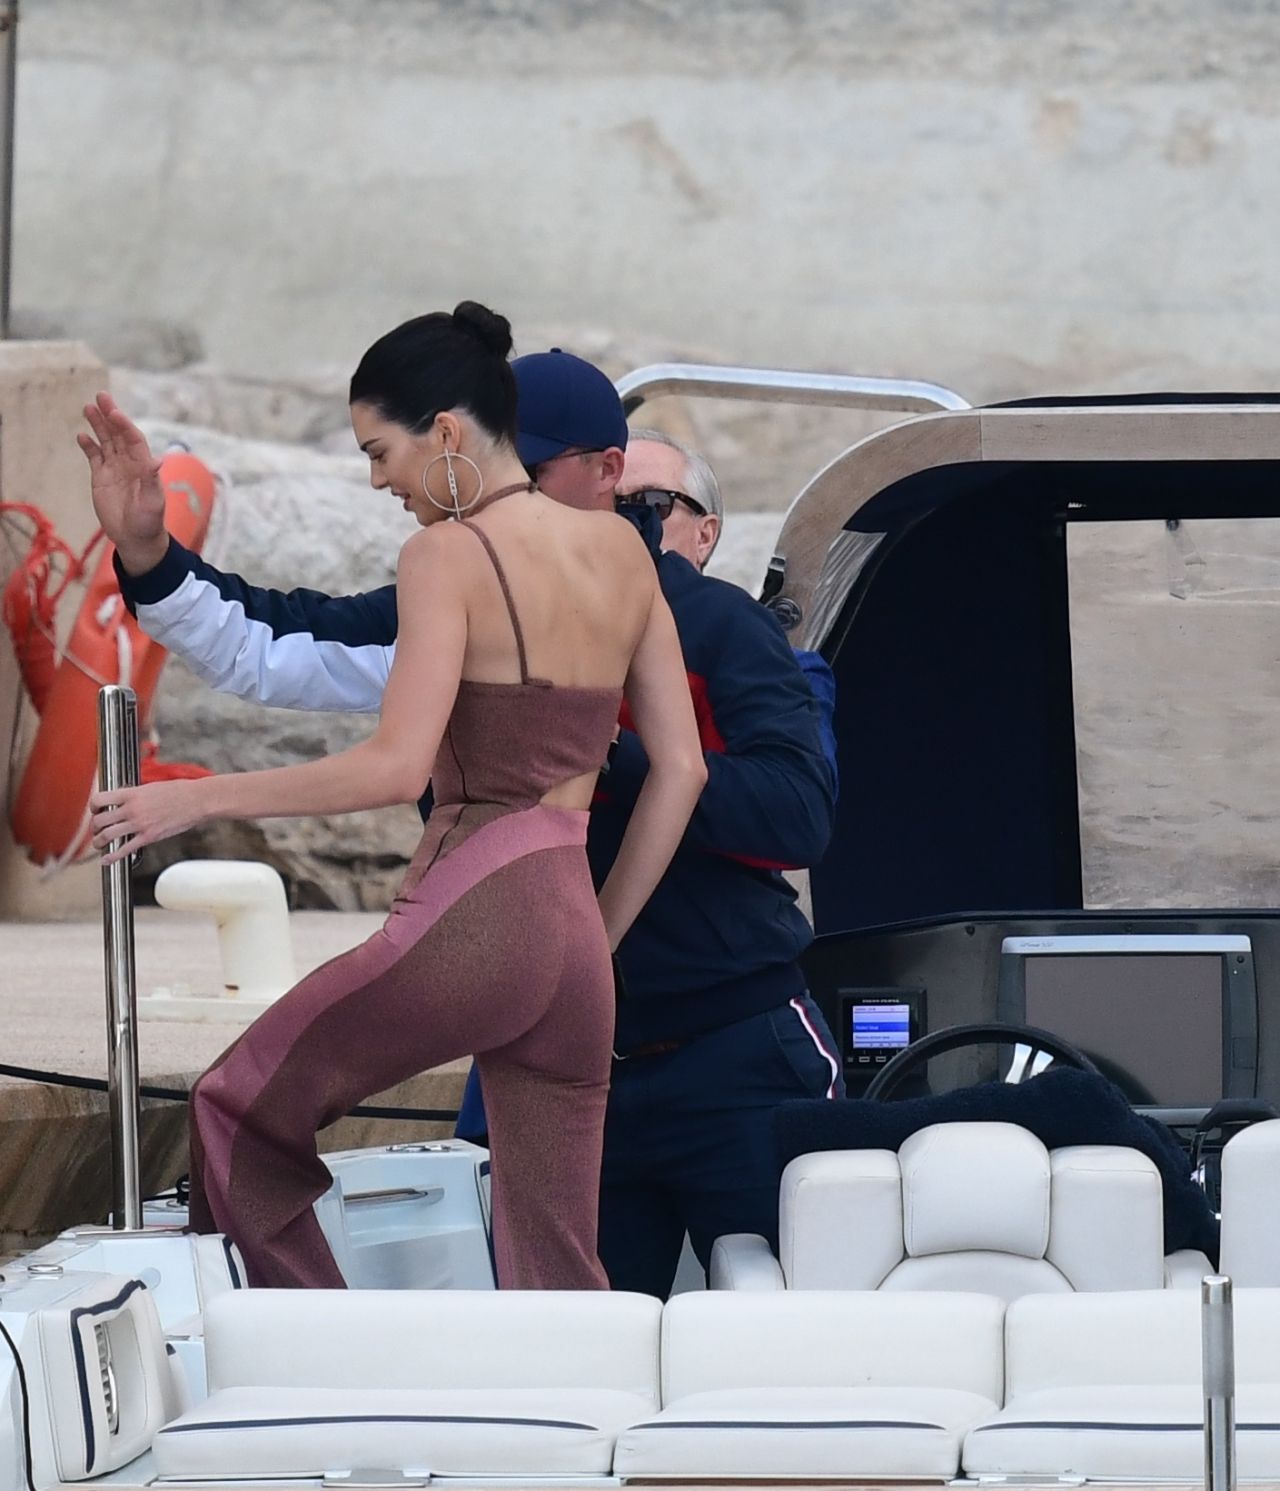 bella-hadid-and-kendall-jenner-tommy-hilfigers-yacht-in-monaco-05-25-2019-19.jpg